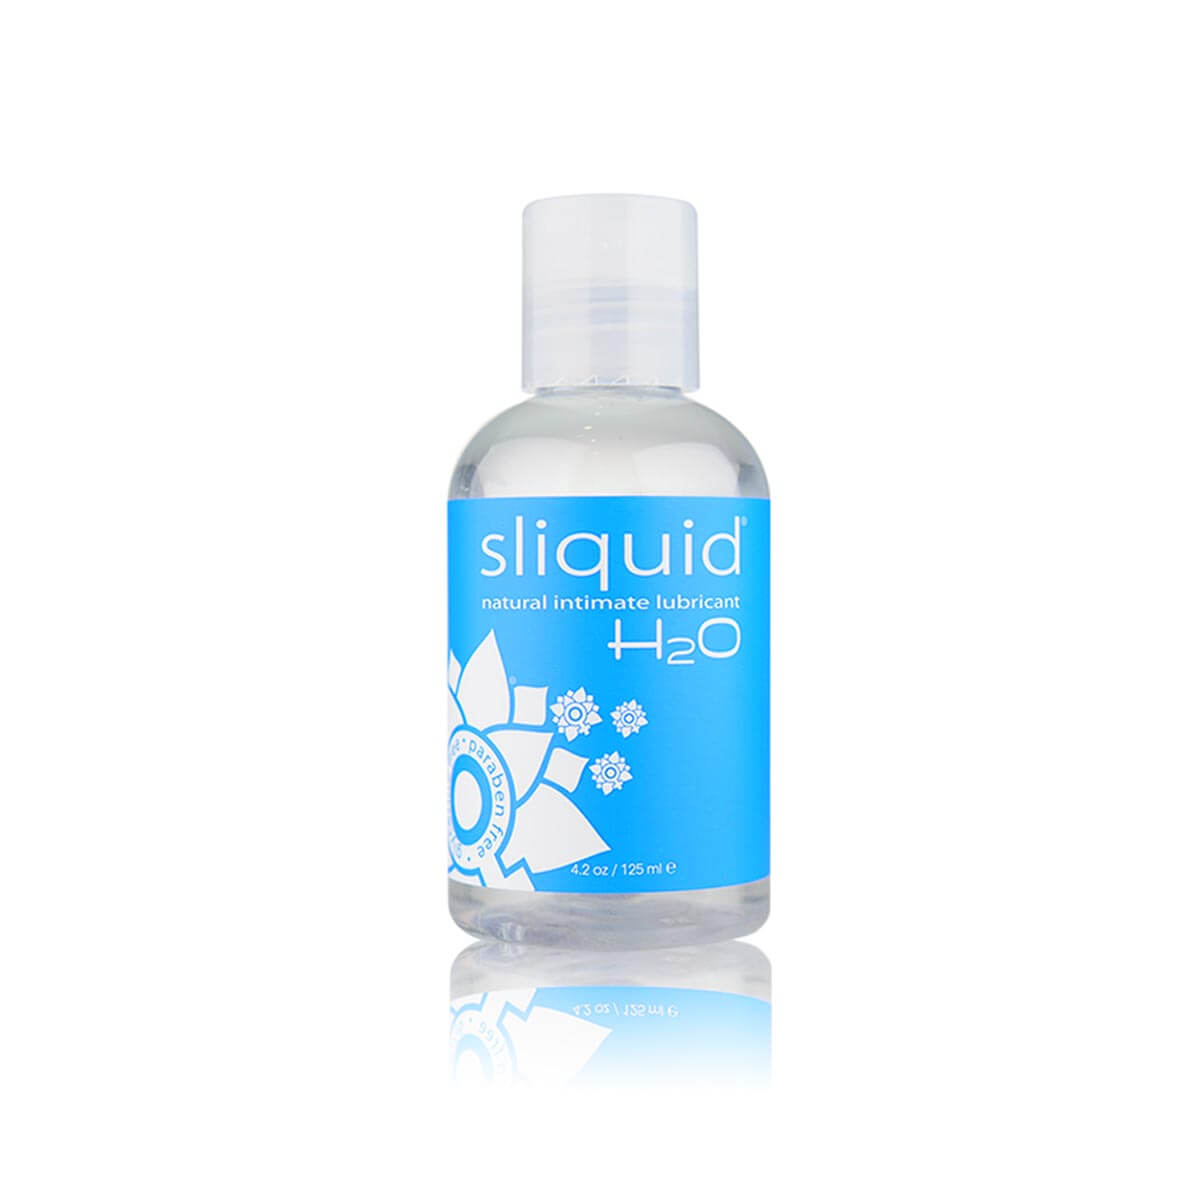 Small bottle of clear vegan intimate lubricant with blue label by Sliquid Nudie Co